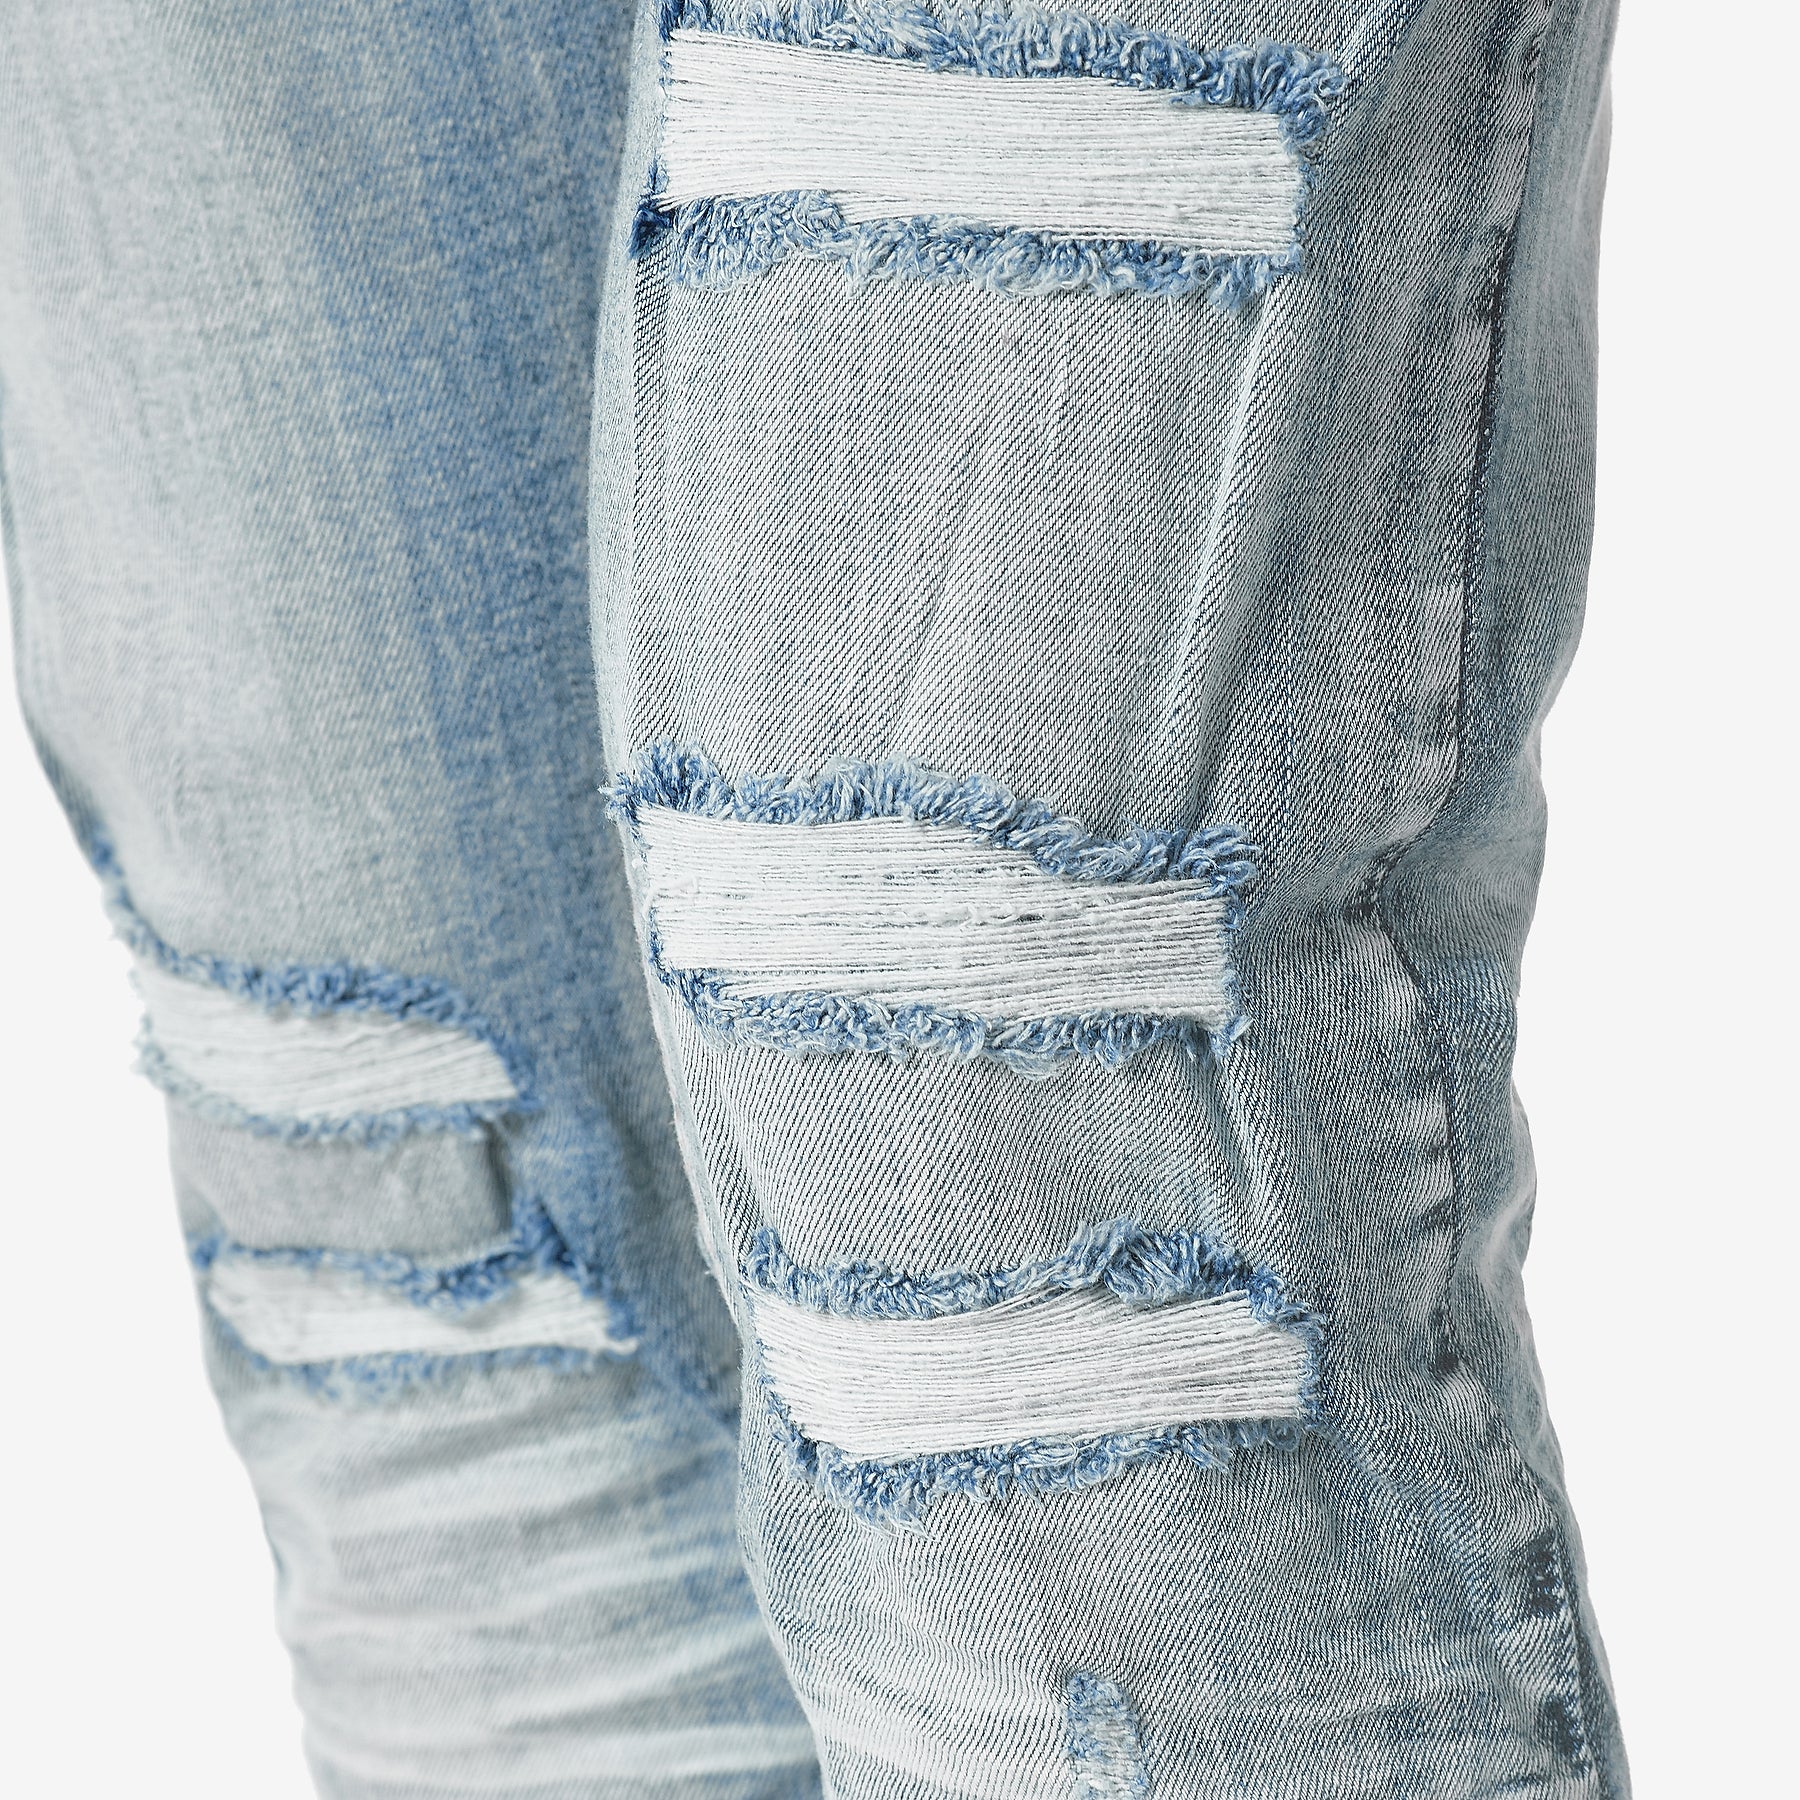 LIGHT TINT BLUE JEANS WITH RIP & REPAIR